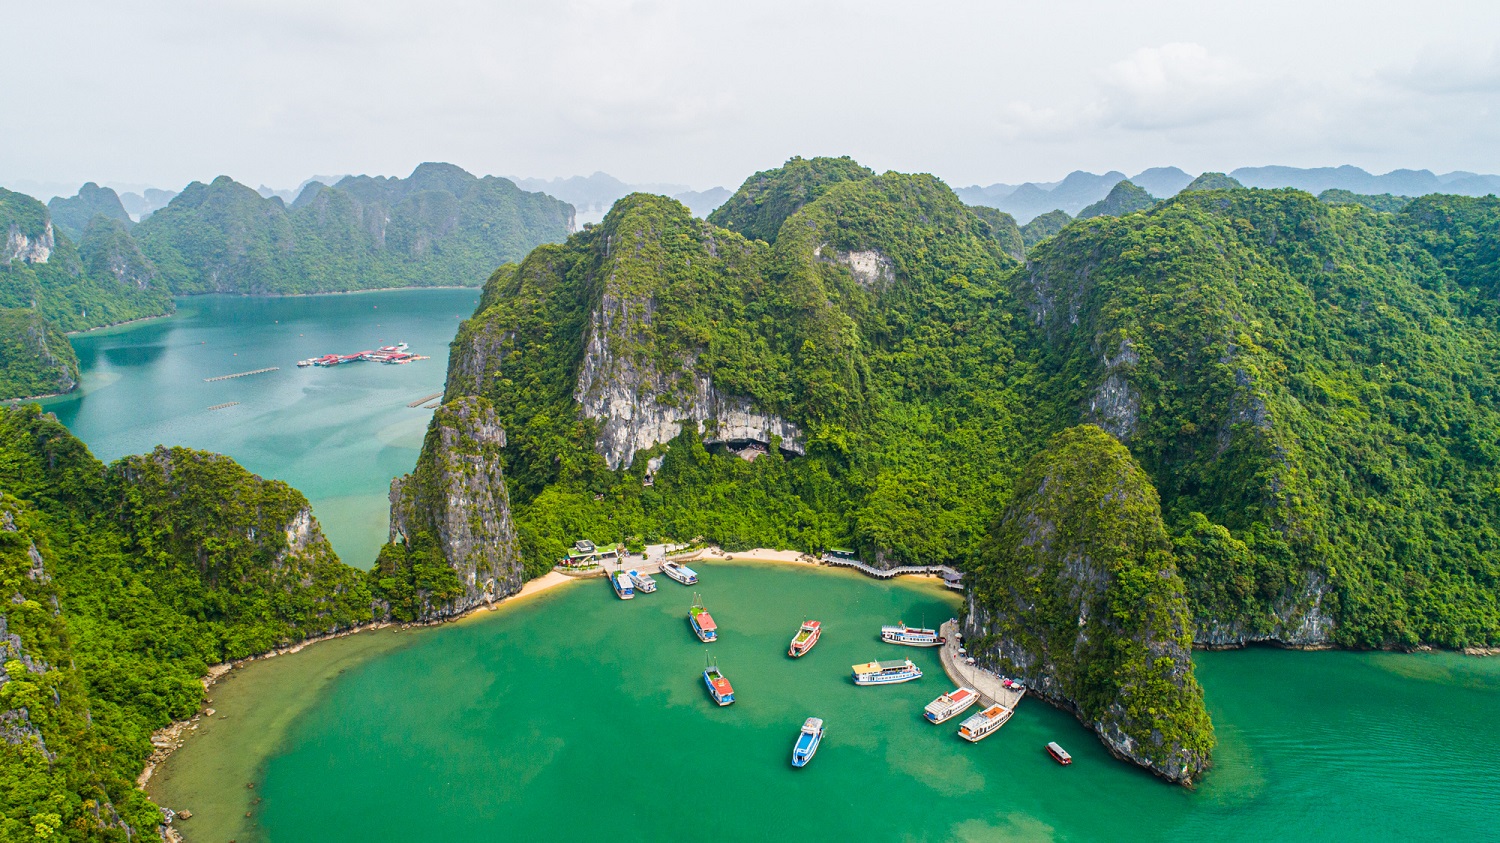 an overview of halong bay scenery from above